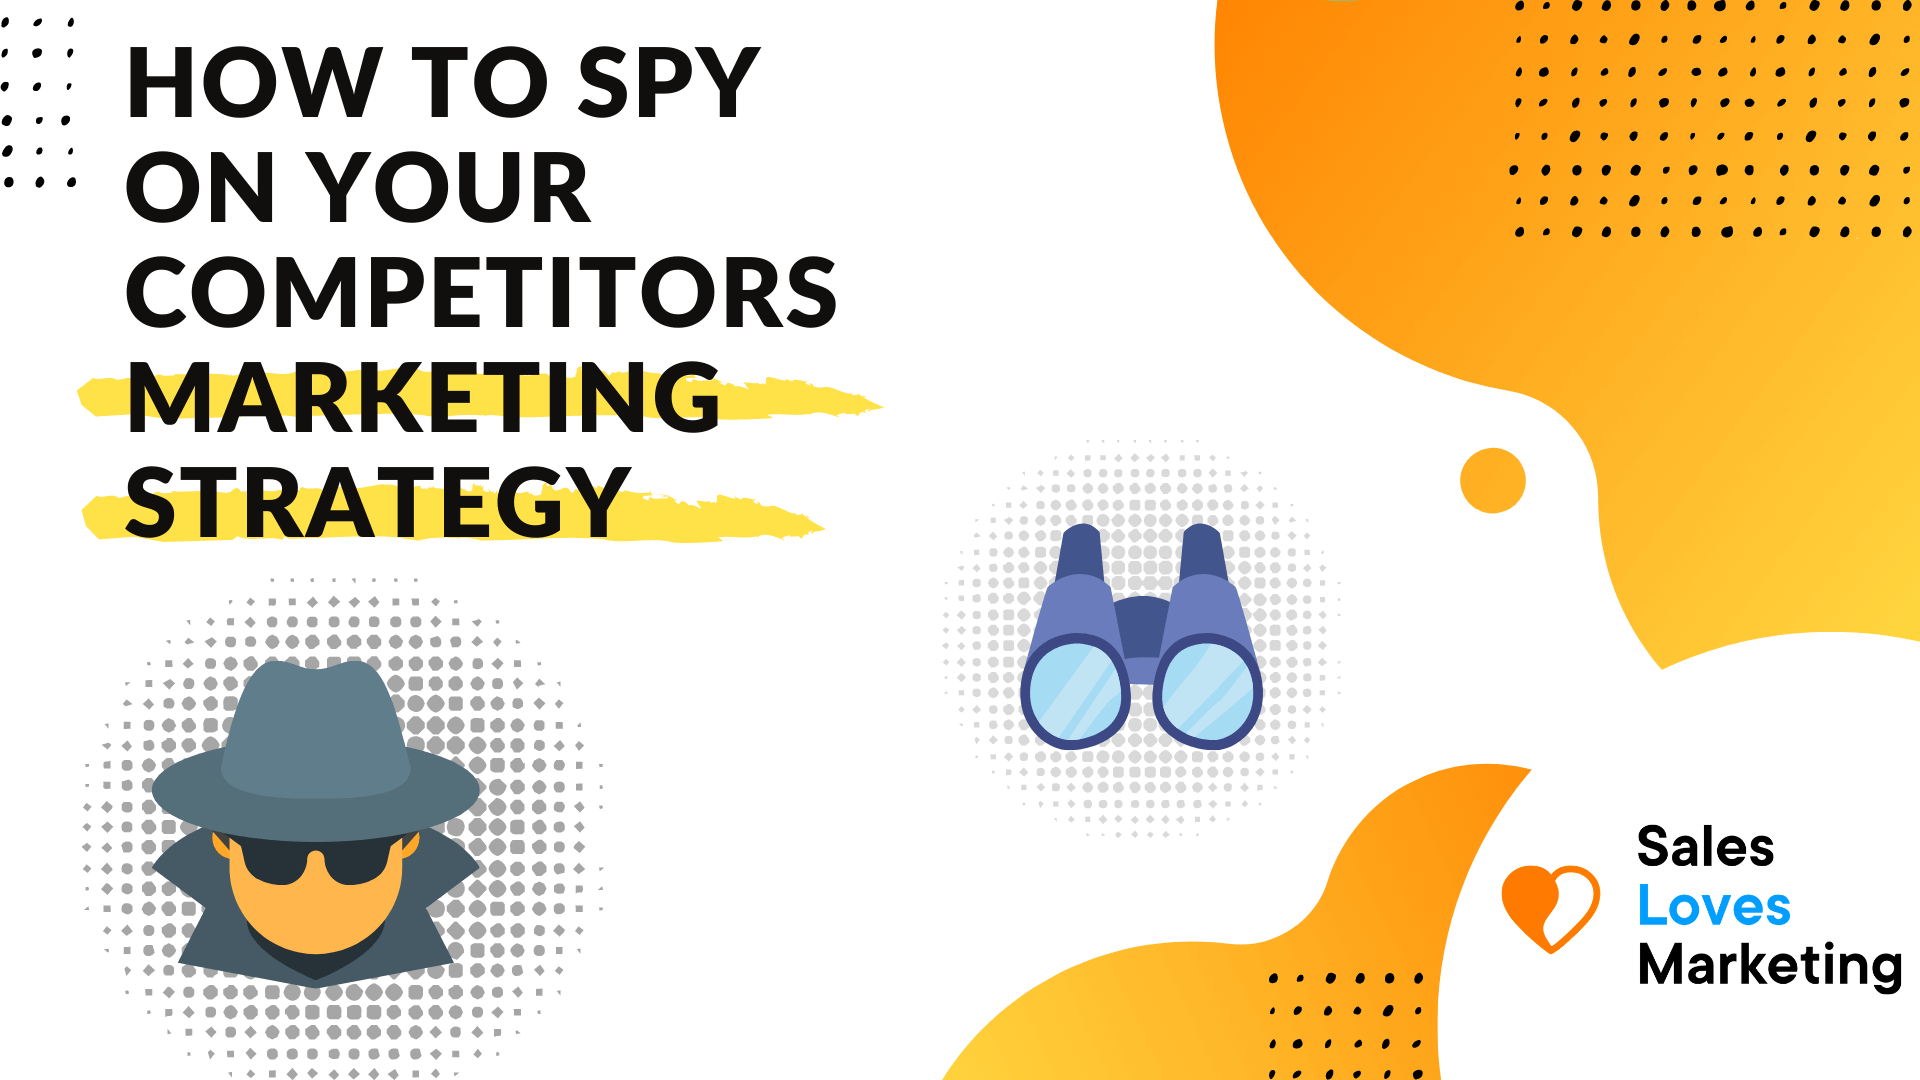 How to Spy on Your Competitors Marketing Strategy and Gain an Edge